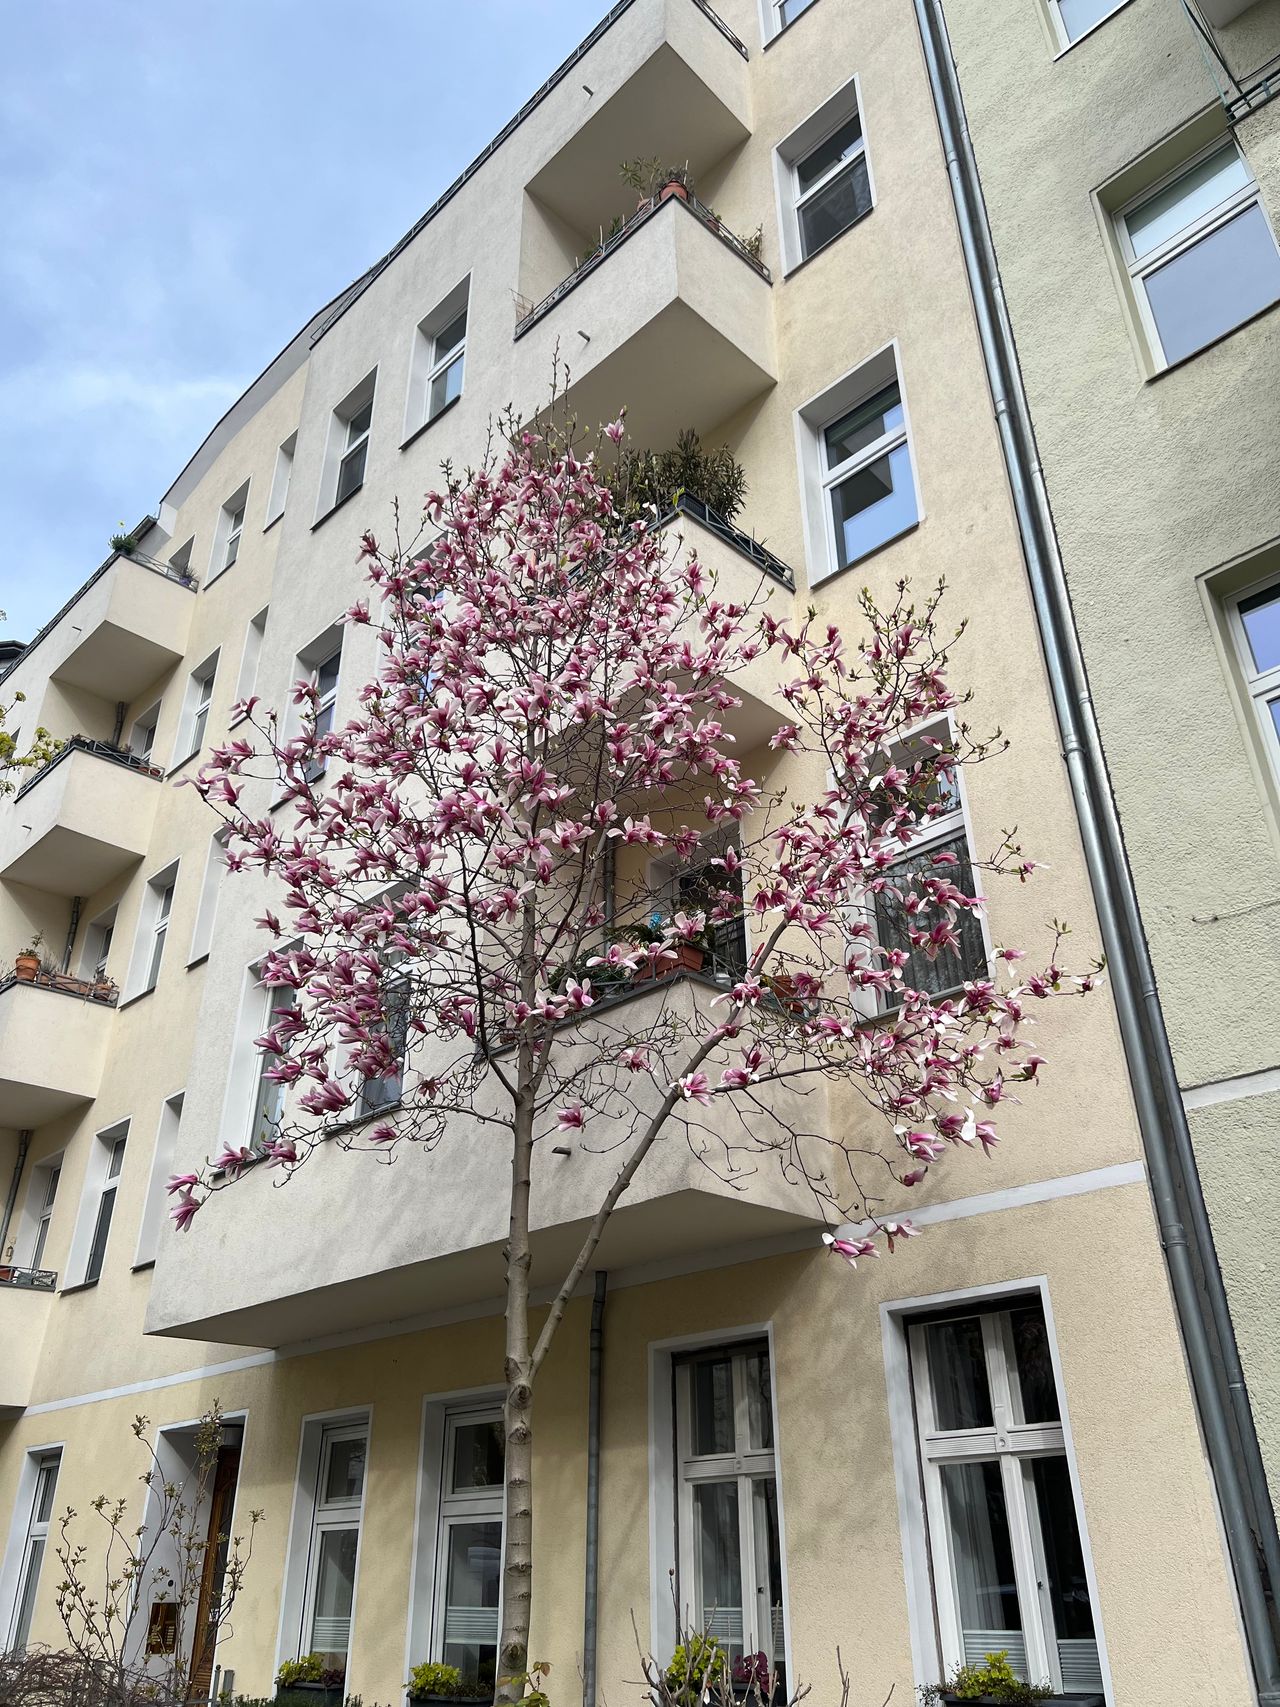 80 Sqm in the heart of Berlin